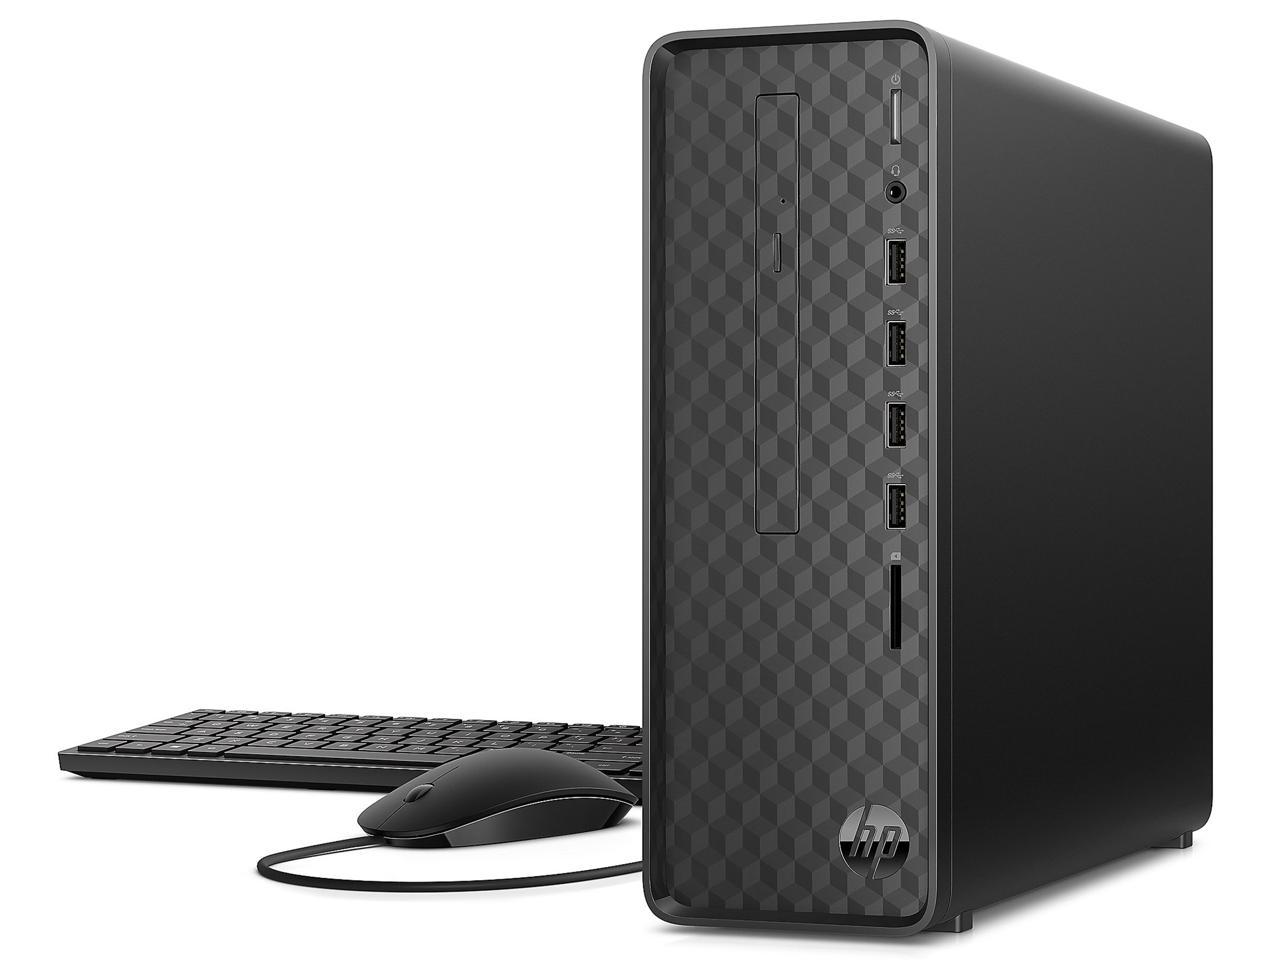 HP Grade A Desktop Computer Slimline 290-A0046 A9-Series APU A9-9425 (3.10 GHz) 8 GB DDR4 1 TB HDD AMD Radeon R5 Windows 10 Home 64-bit (Including Keyboard and Mouse)